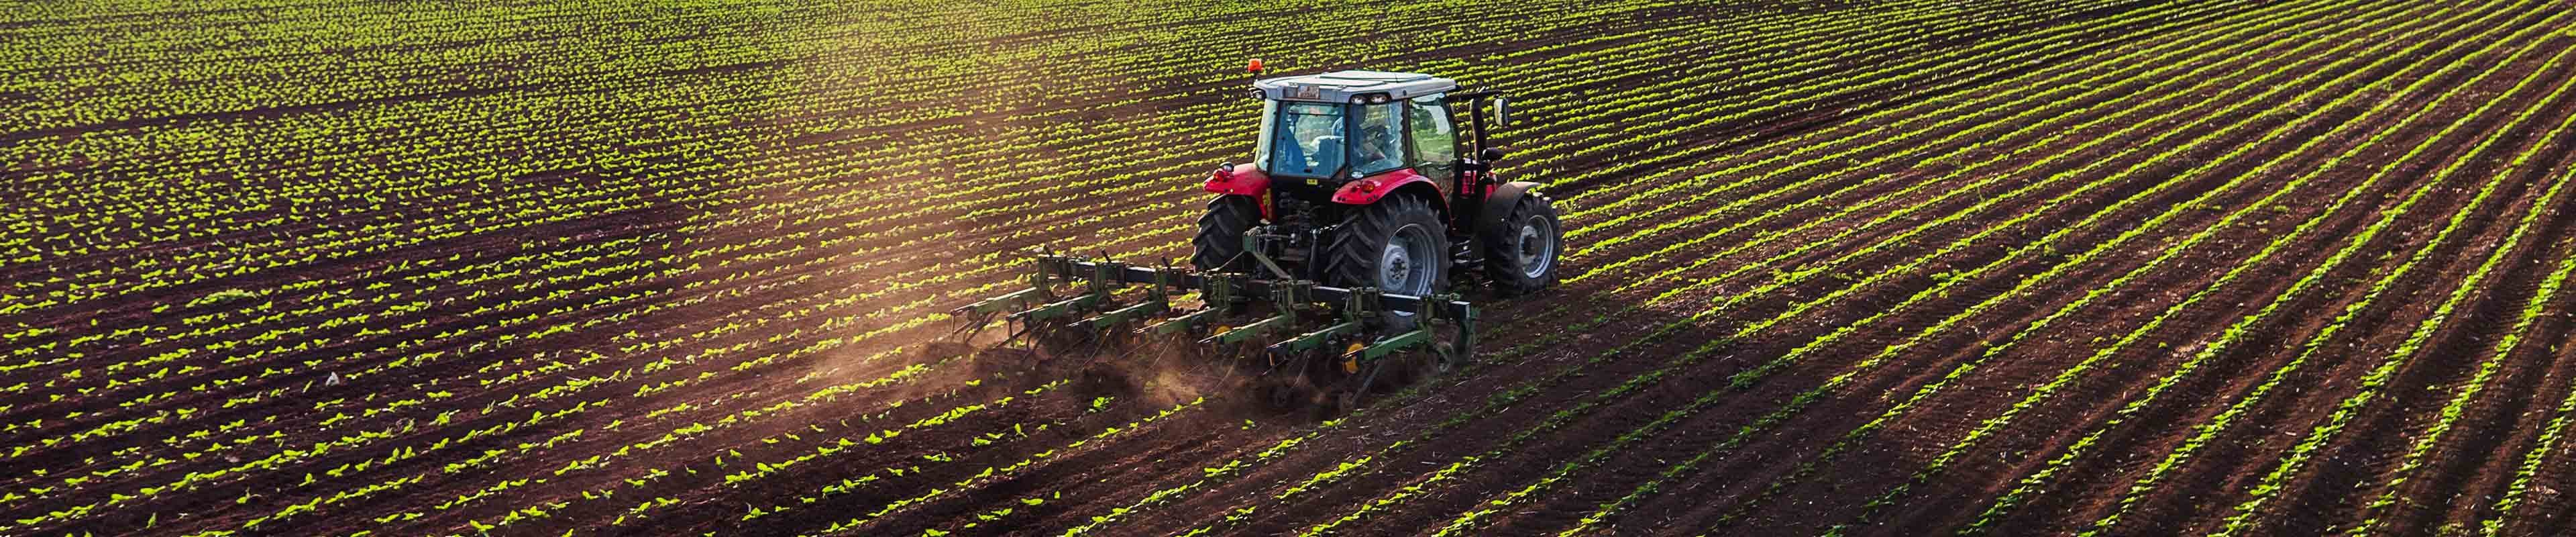 Image of a tractor and implement conditioning soil around seedling crops.